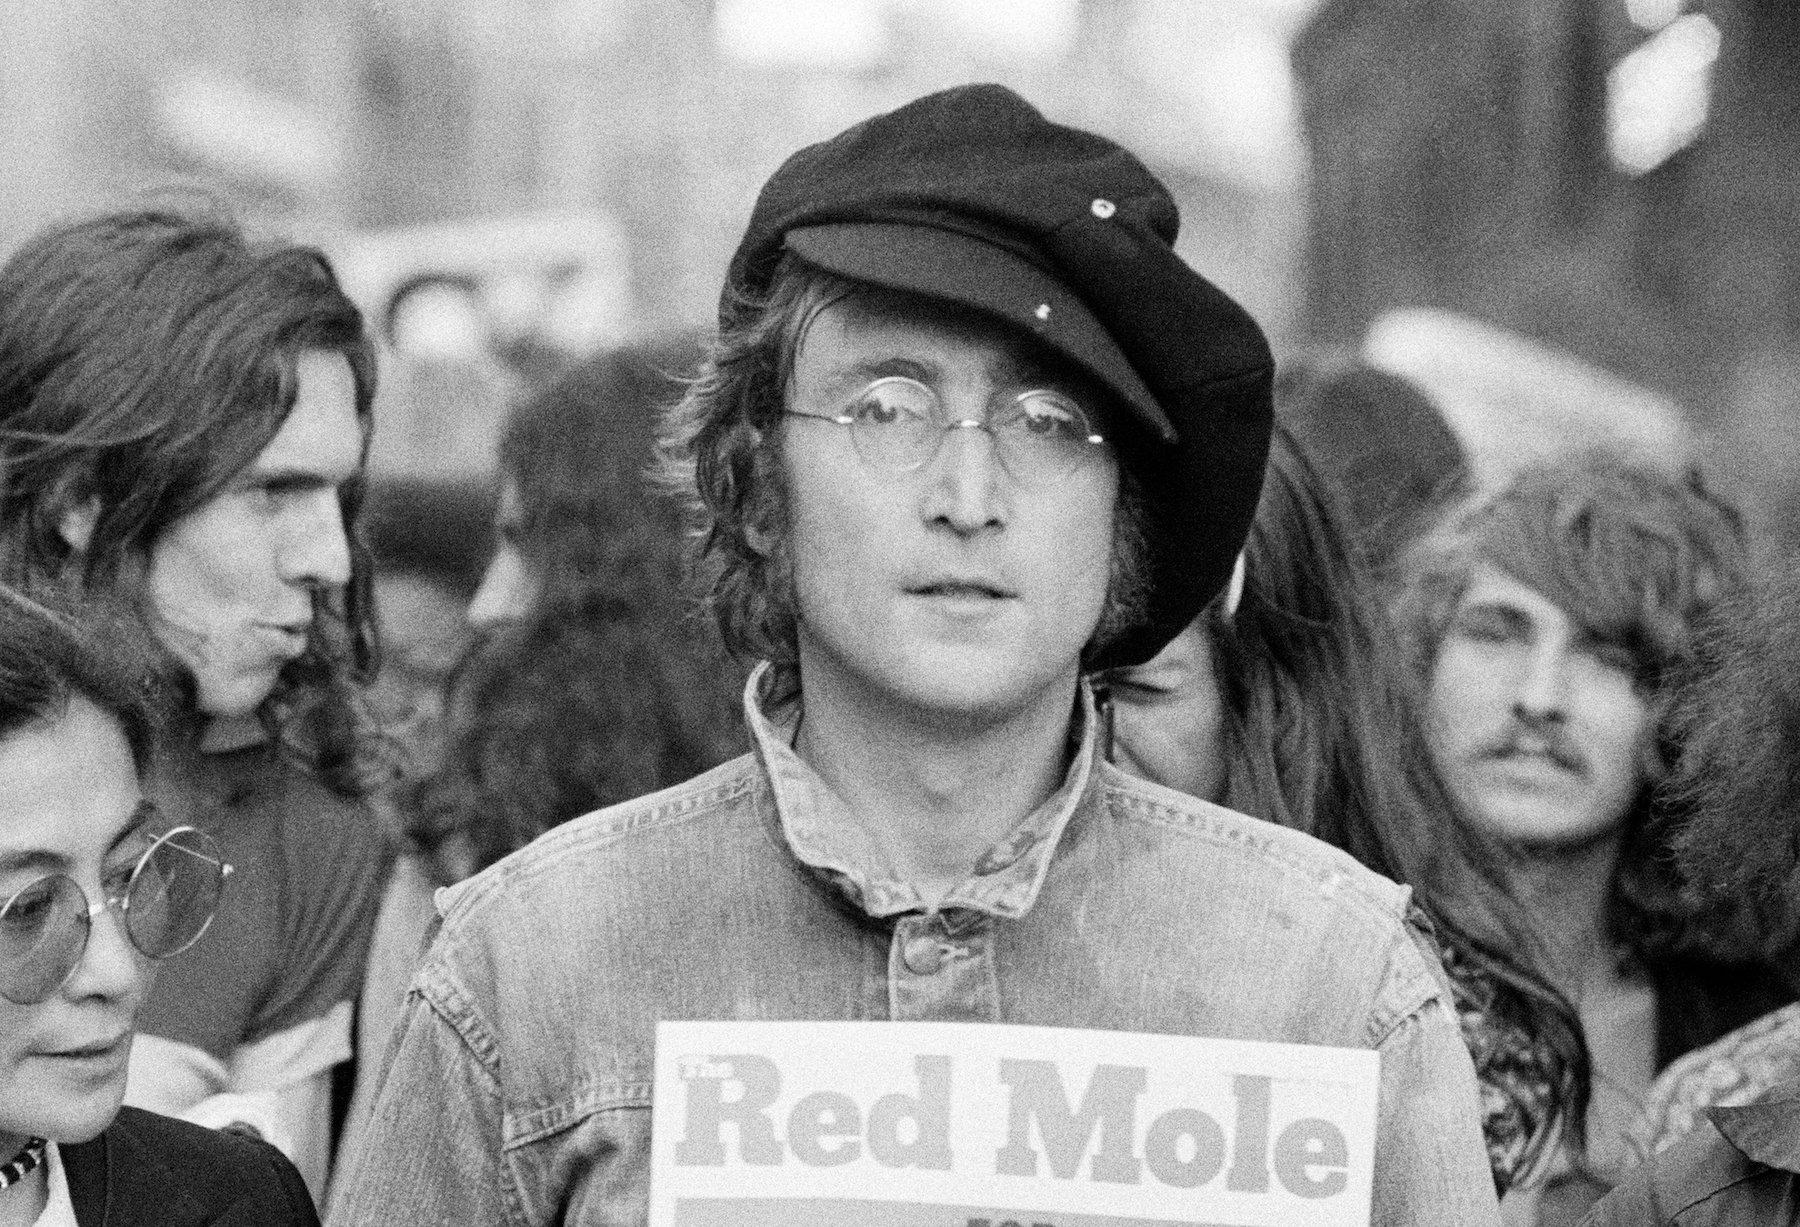 British musician John Lennon and his wife, artist and musician Yoko Ono as they attend an unspecified rally